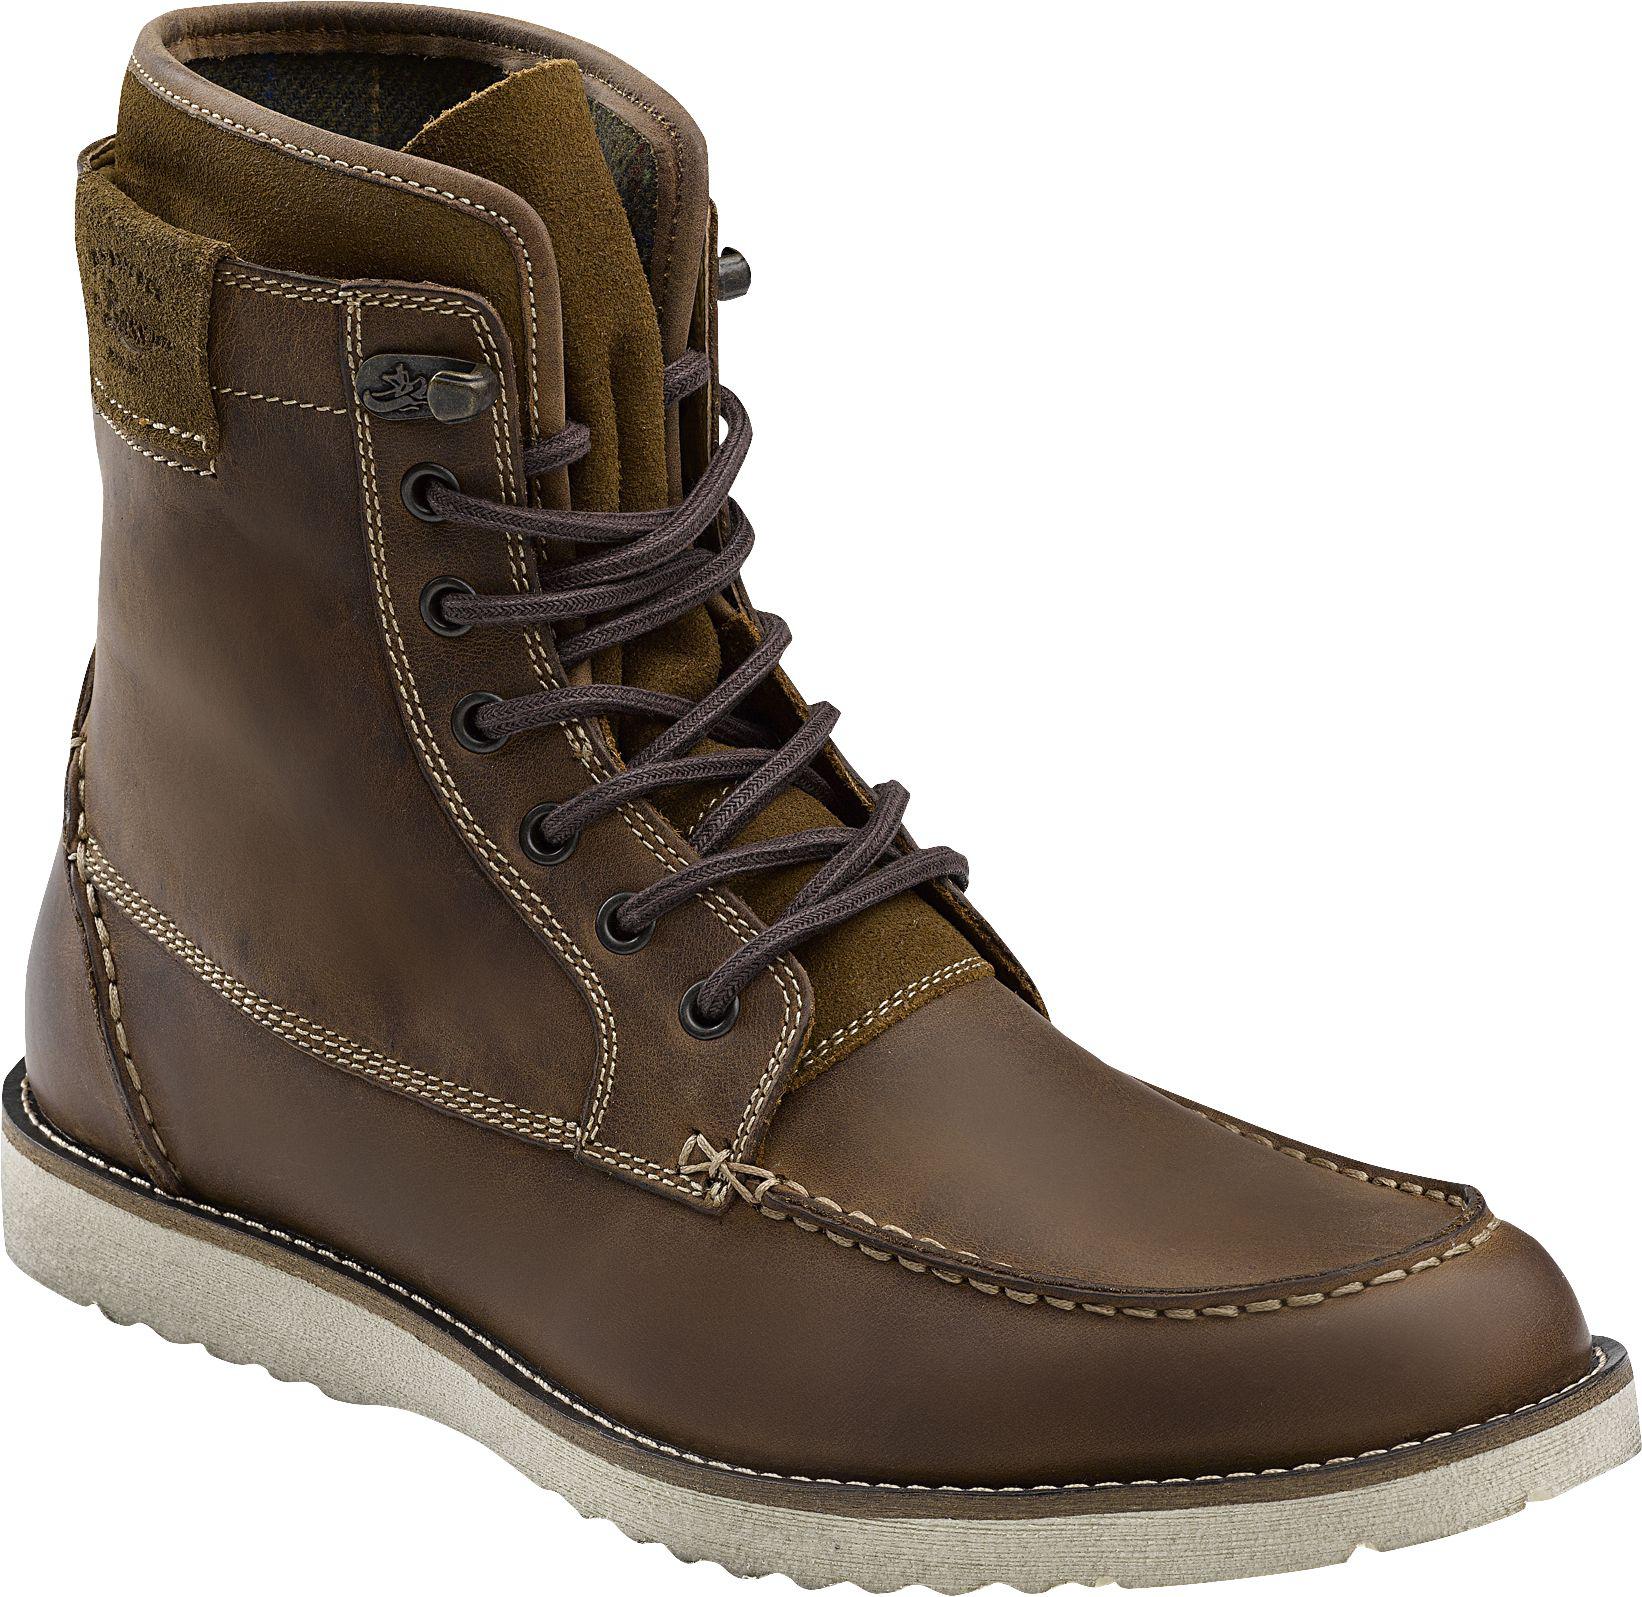 Lyst - Jos. a. bank G. H. Bass Shane Boots in Brown for Men